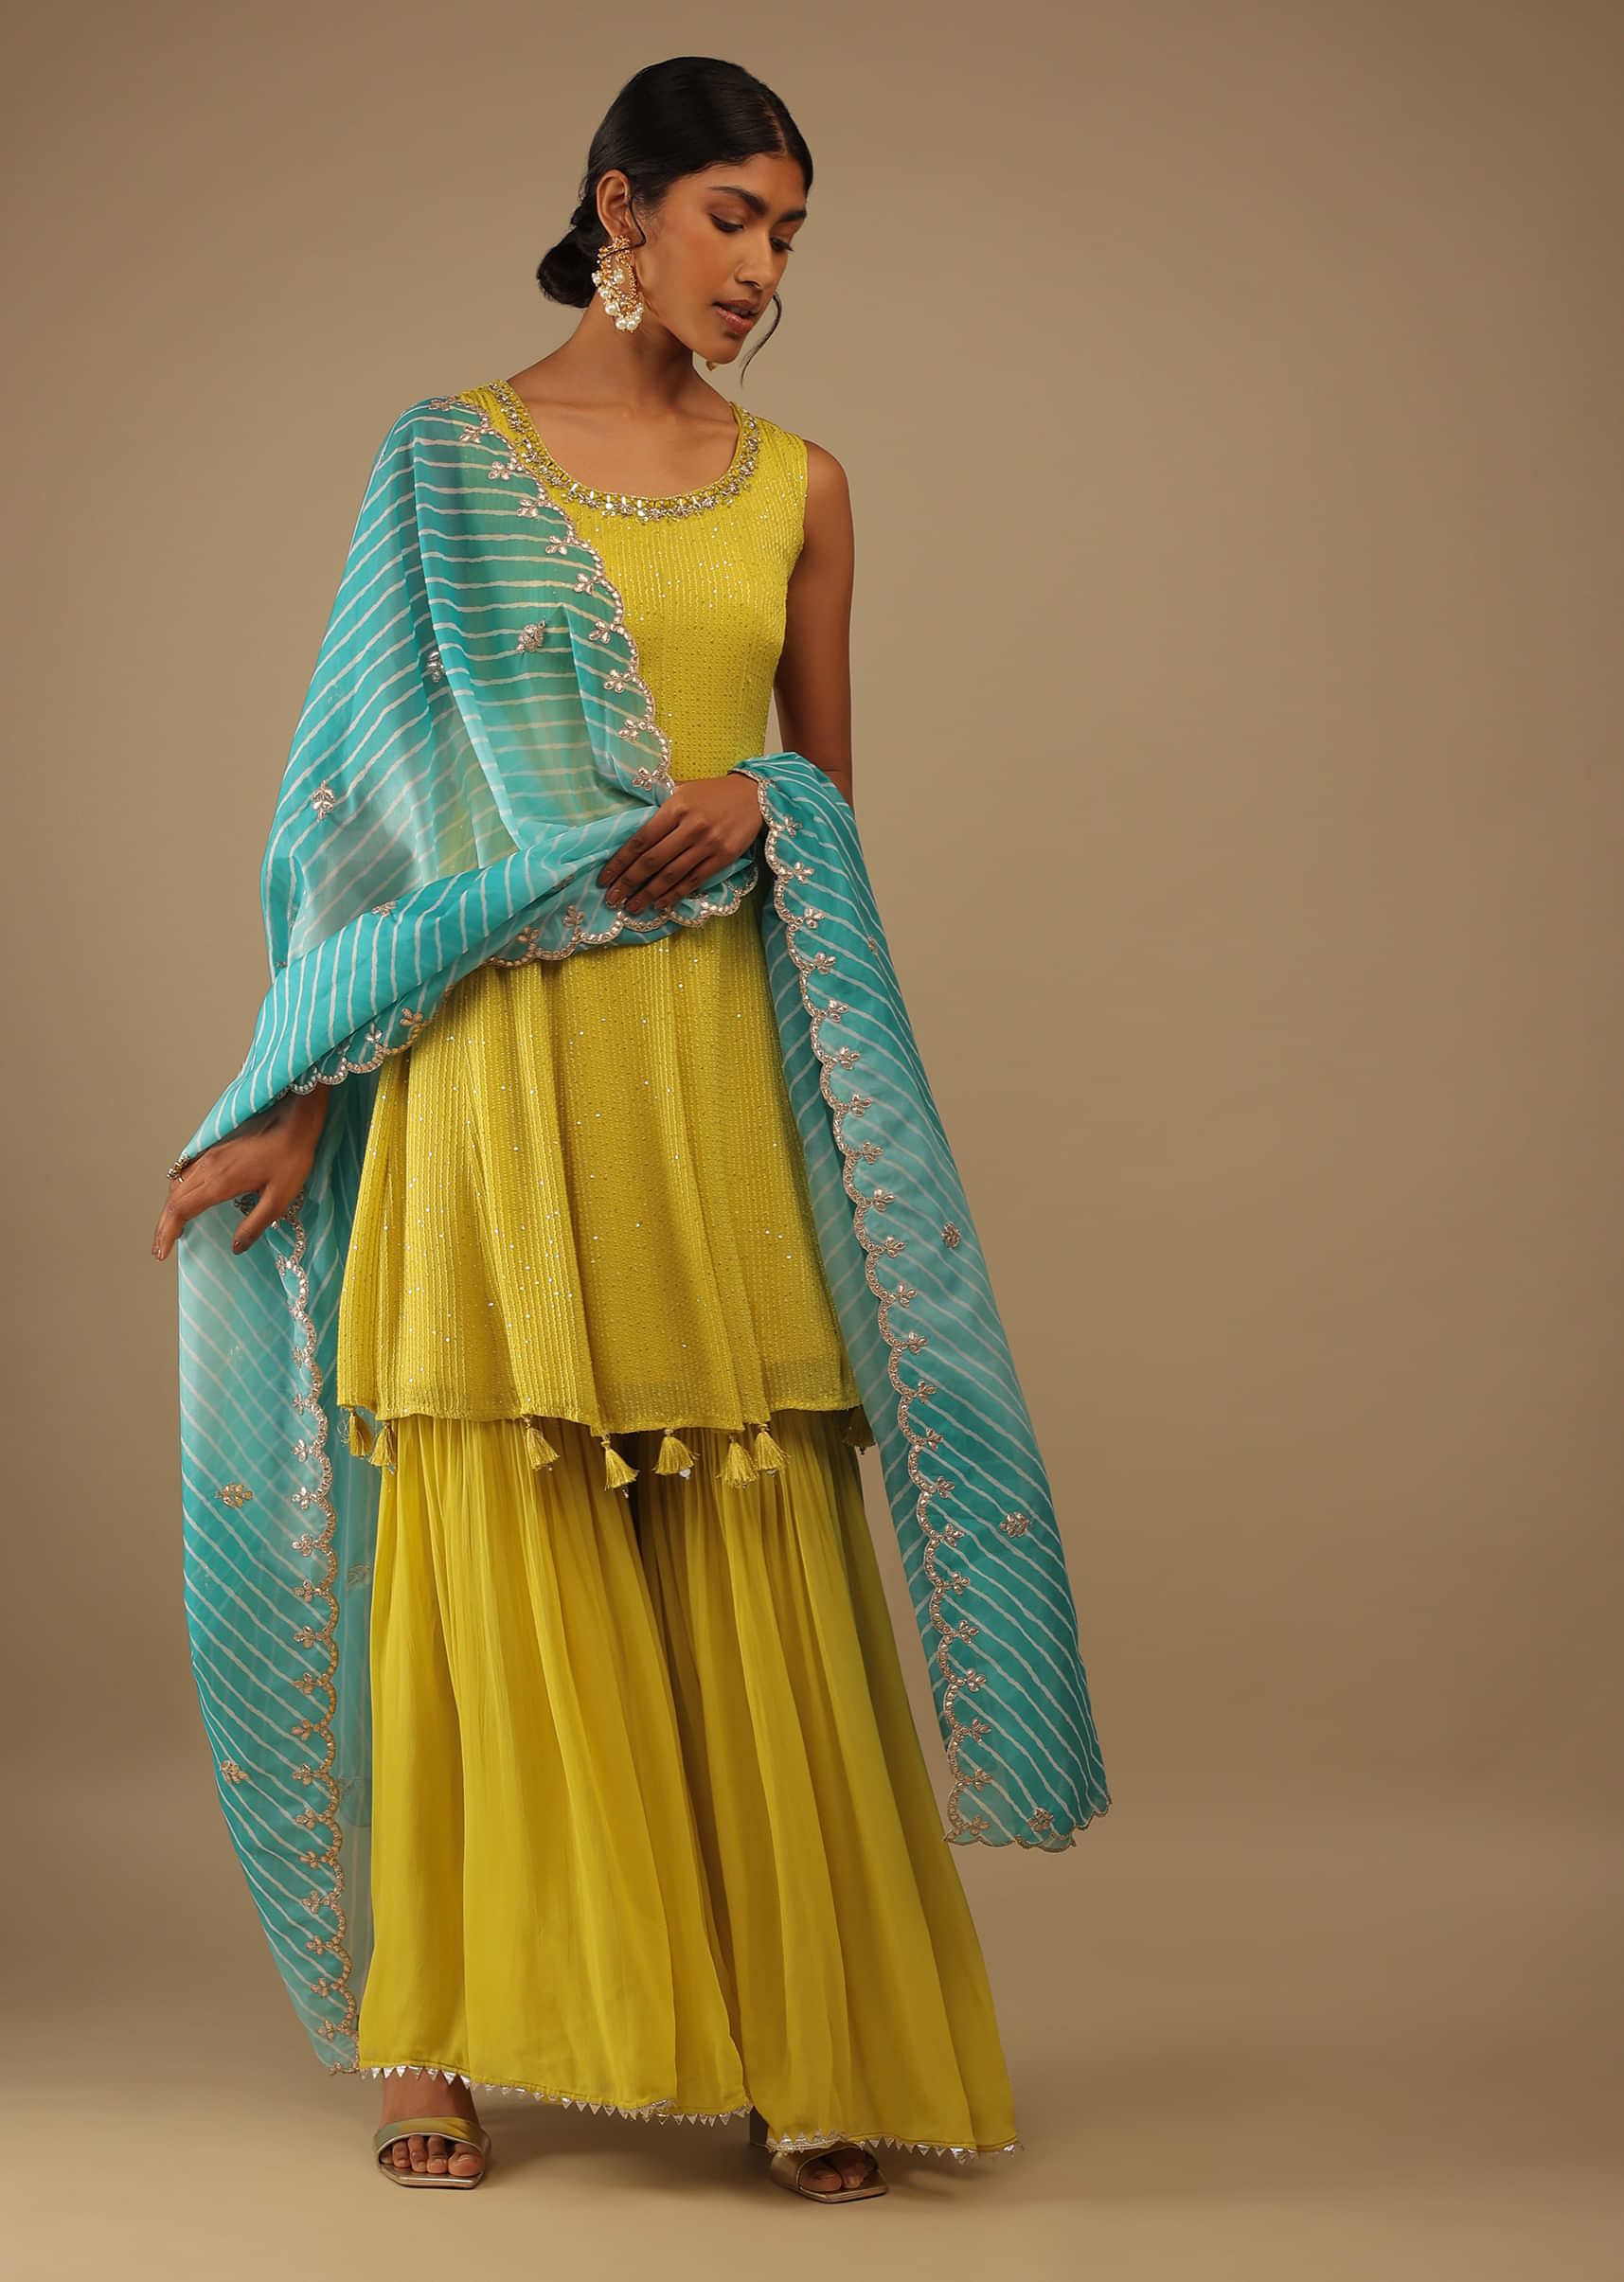 Citrus Green Sharara Pants And Kurta In Sleeveless, Kurta Crafted In Net With Resham And Sequins Embroidery